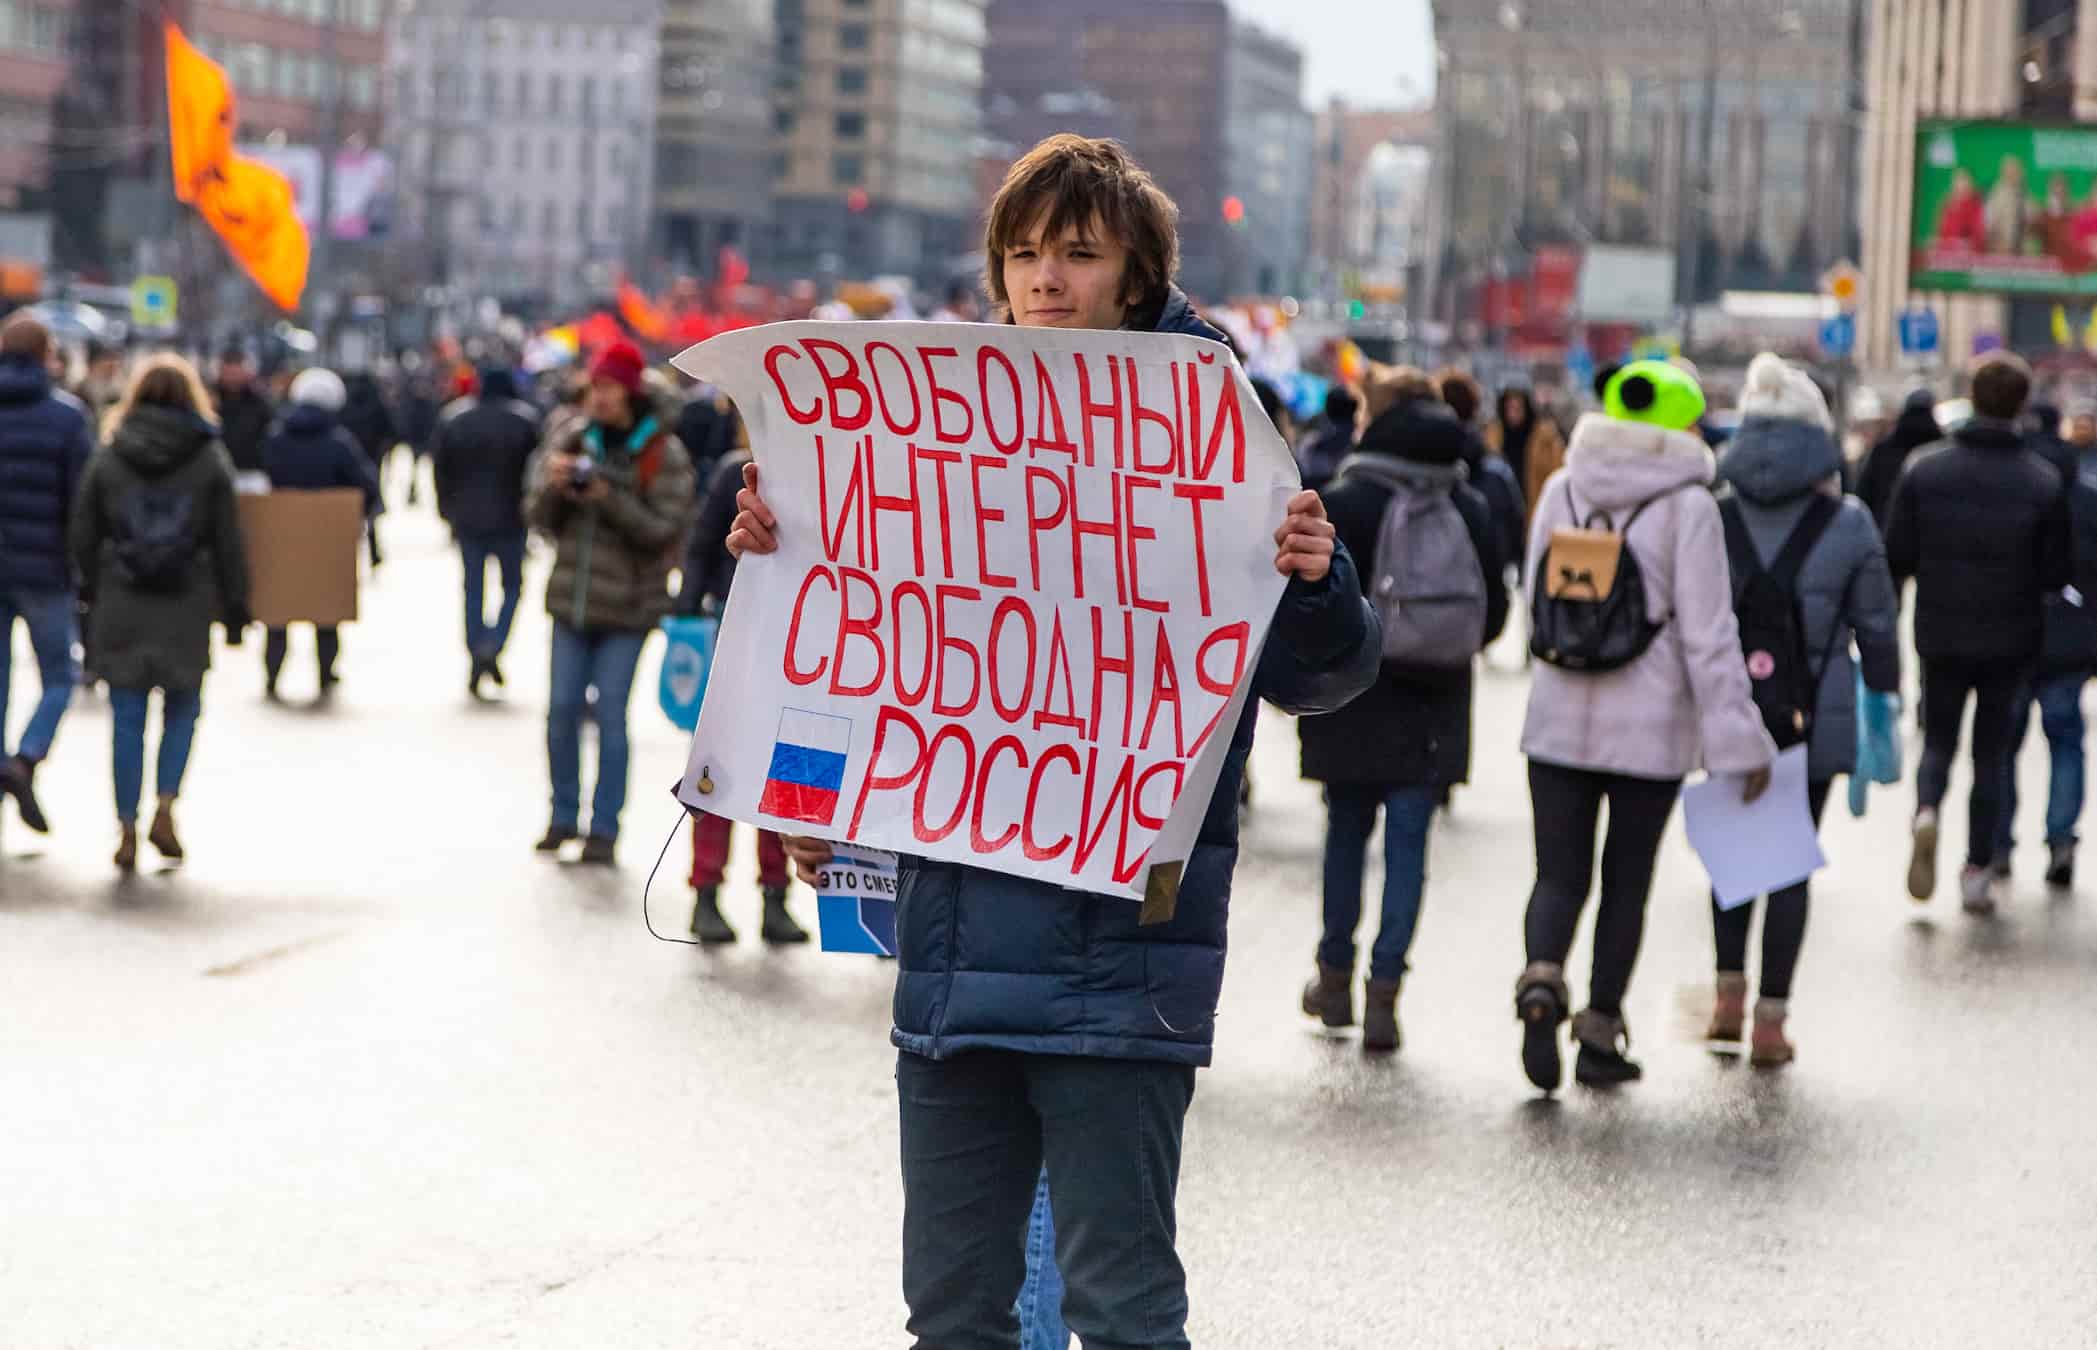 A protestor marching against Russia's increasing internet censorship laws